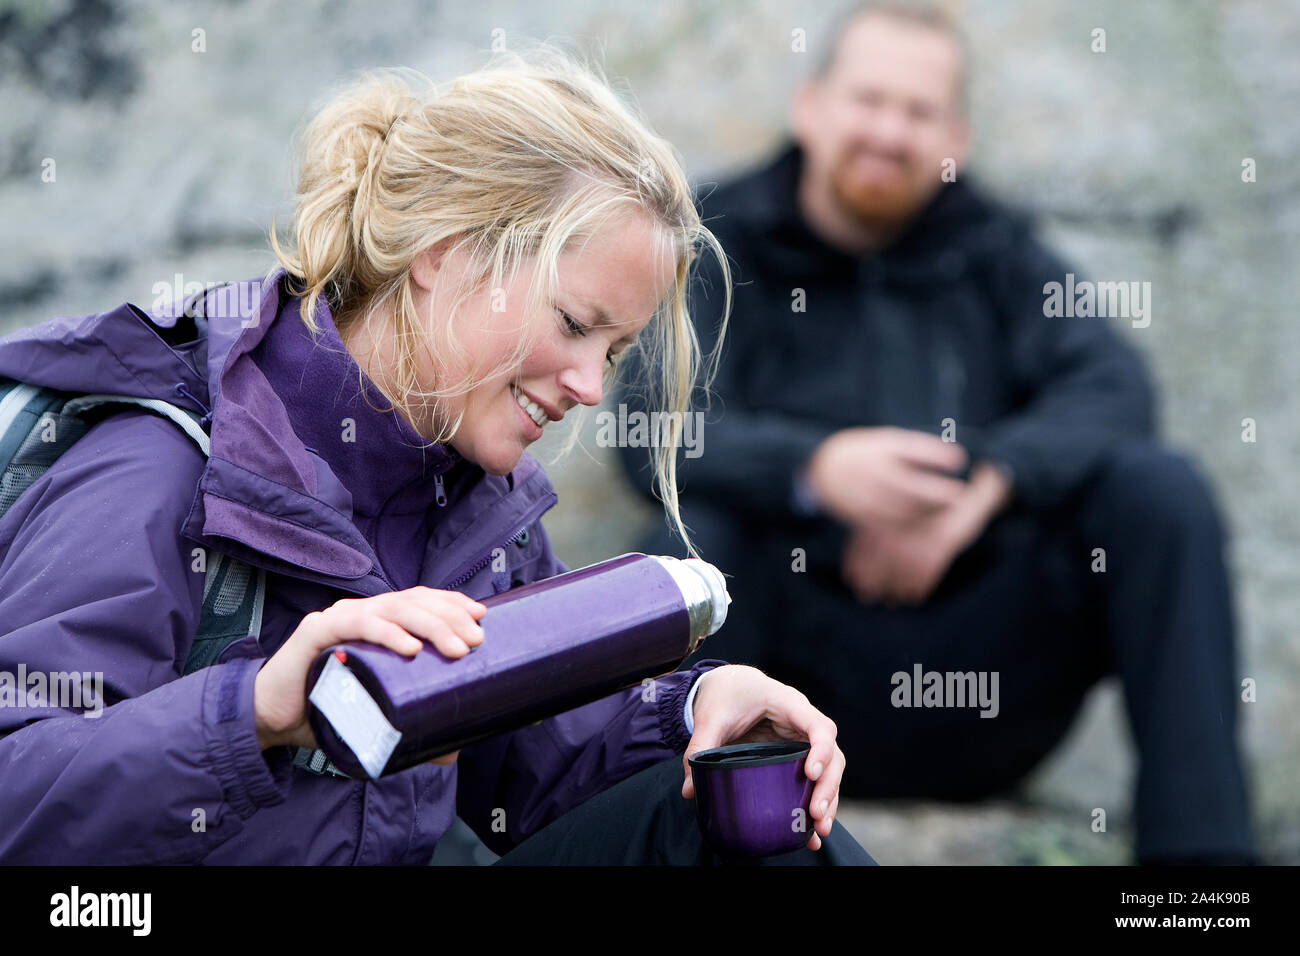 Portrait Of Woman Pouring Coffee And Man Sitting At Background, Outdoors Stock Photo